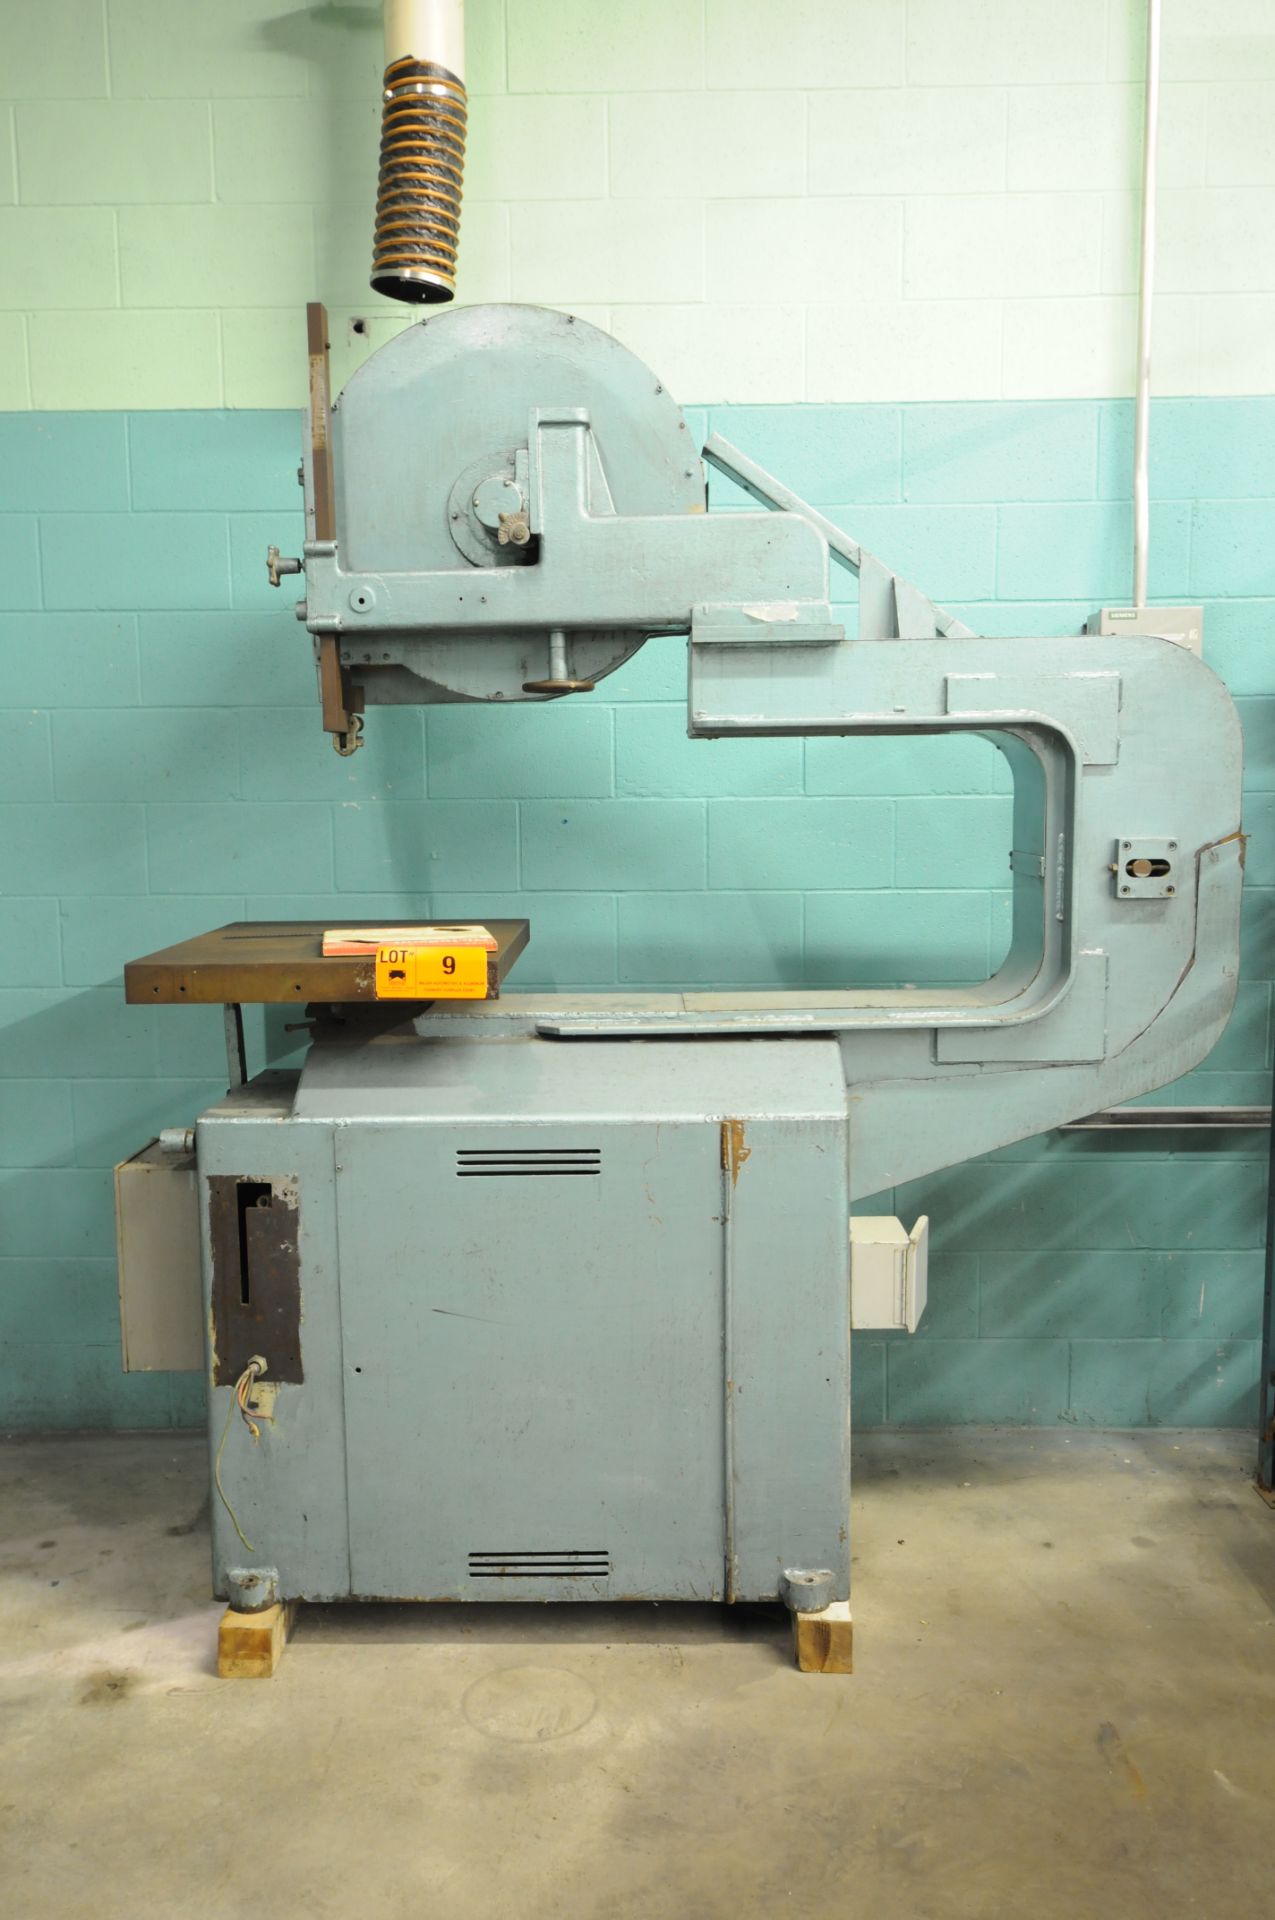 MFG N/A VERTICAL BAND SAW WITH 24" X 28" SWIVEL/ ROTATING TABLE, 48" THROAT, 13" MAX CUTTING